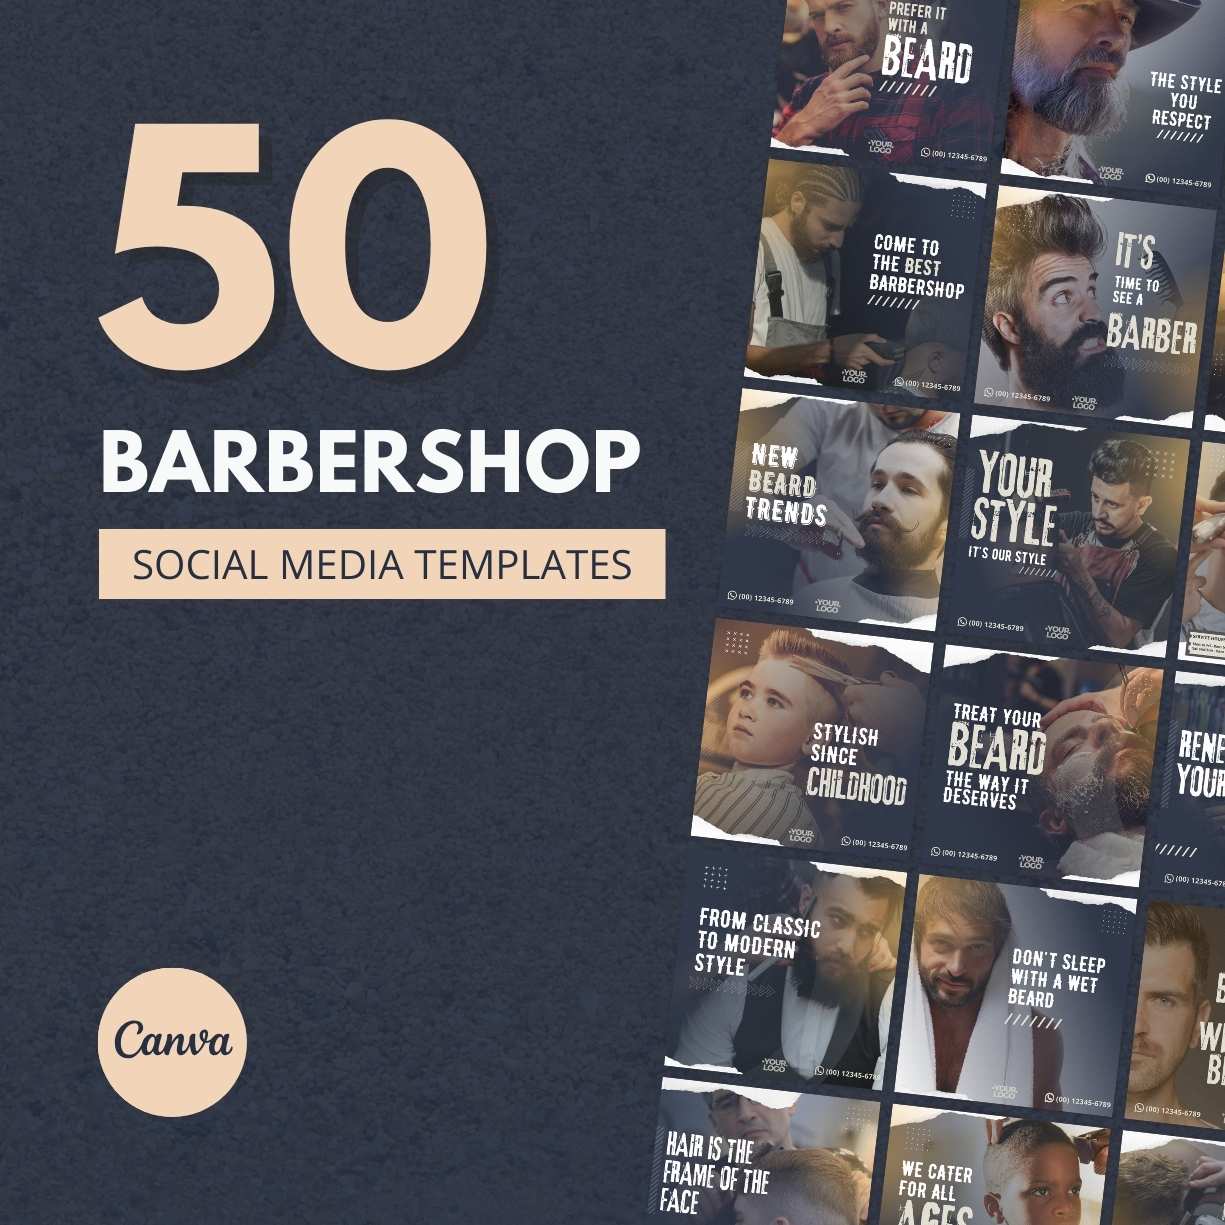 50 Barbershop Canva Templates For Social Media cover image.